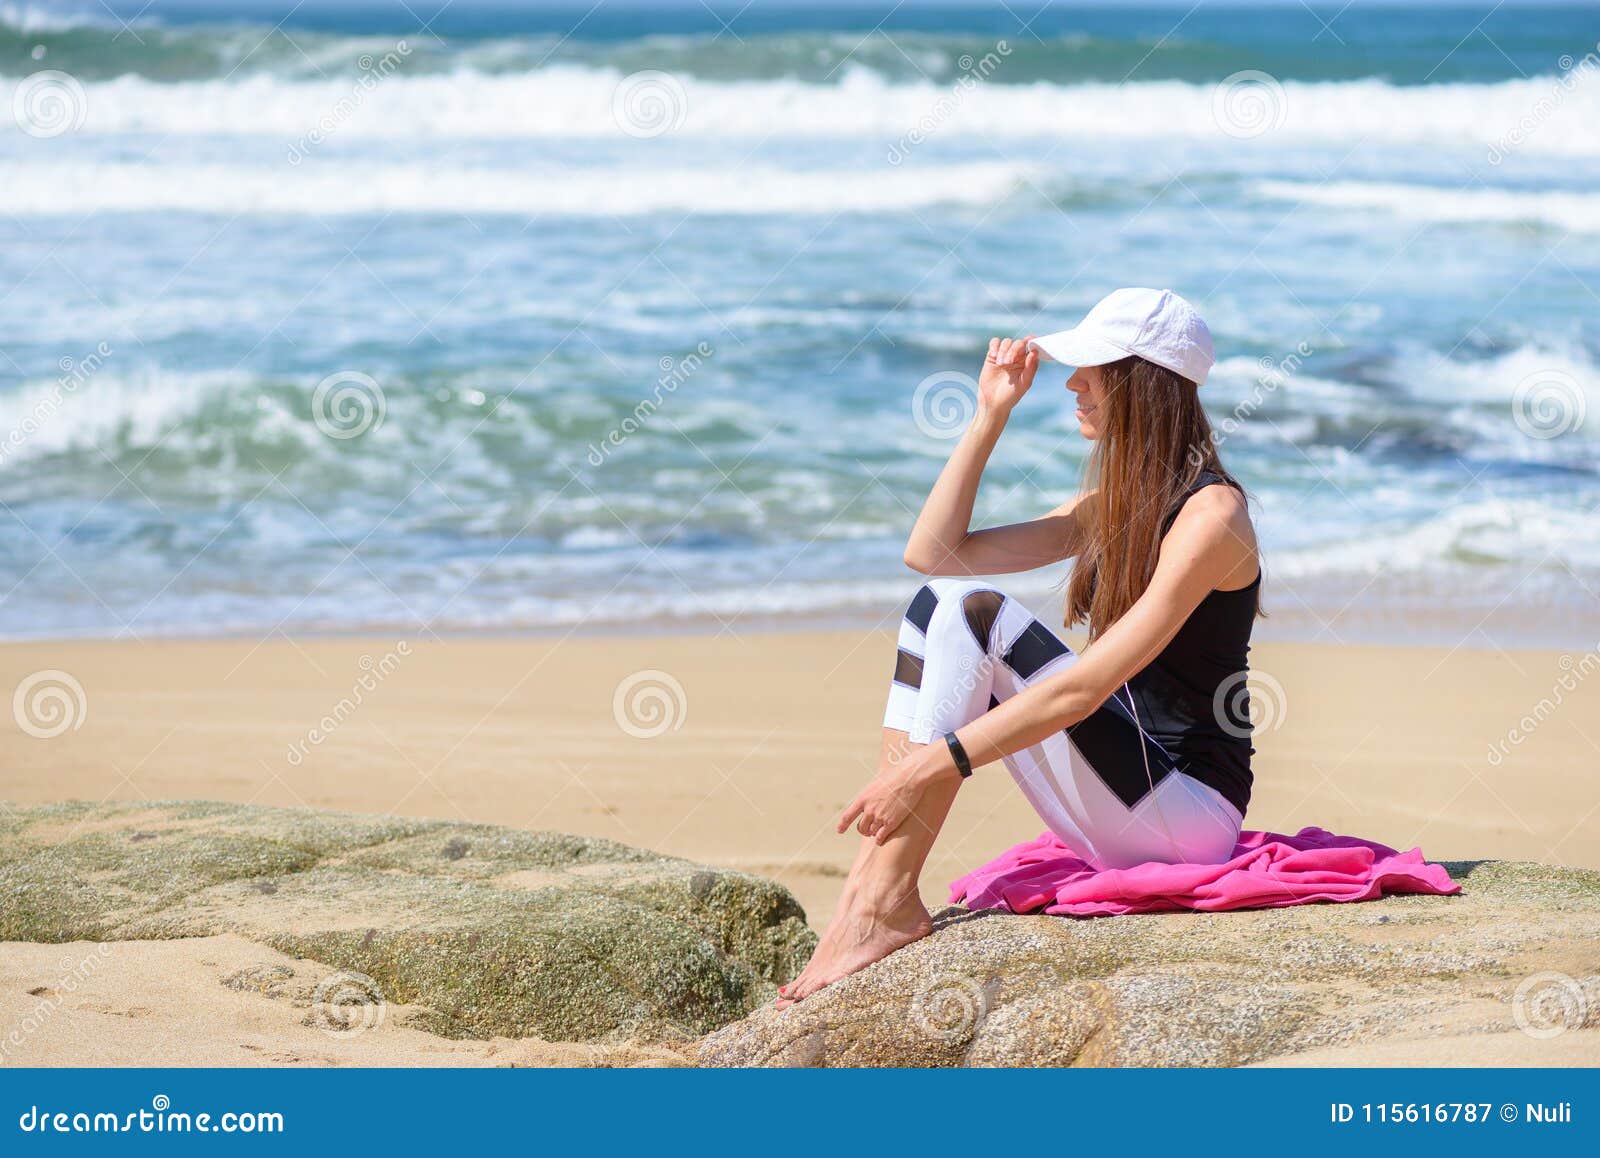 Smiling Active Young Woman in Sports Outfit on the Beach Stock Image ...